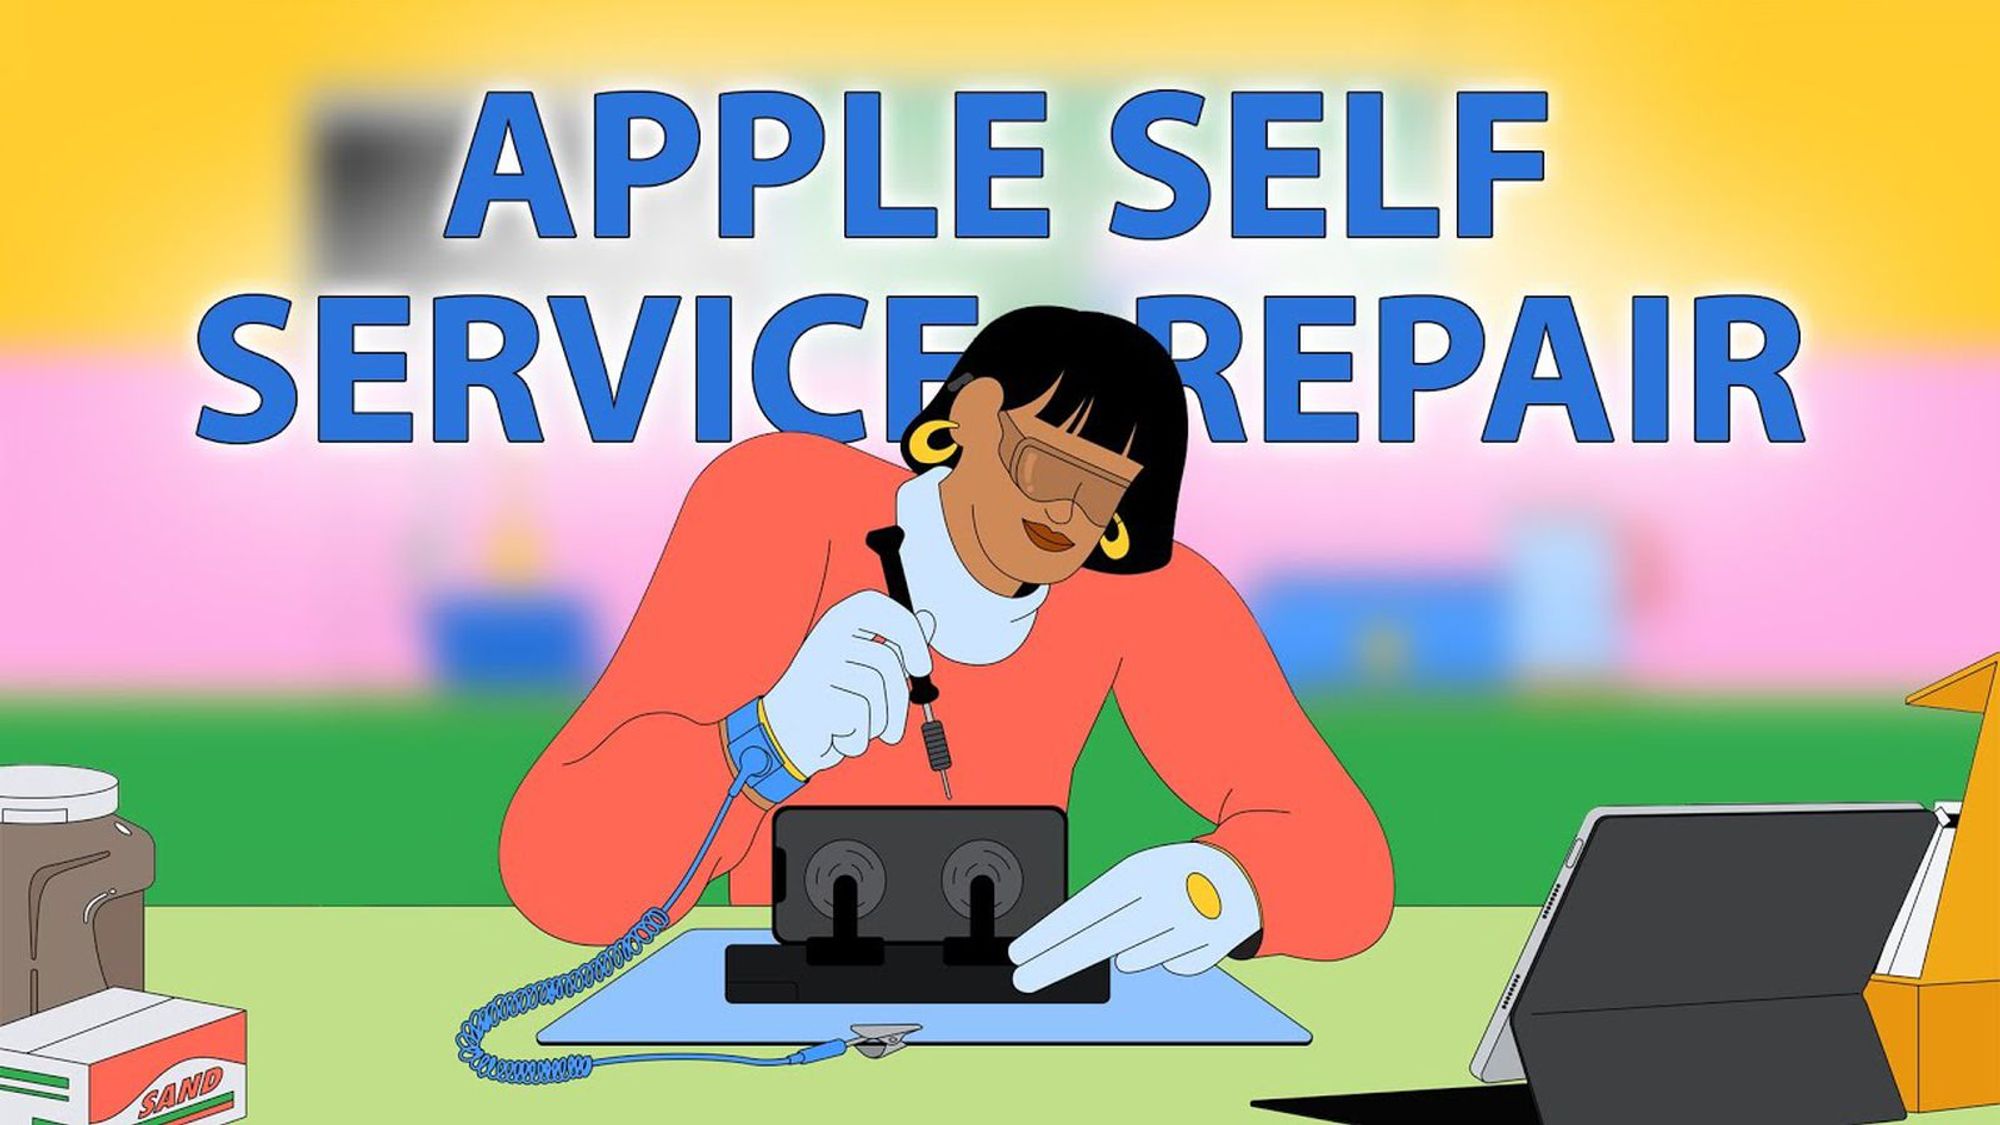 Everything You Need to Know About Apple's Self Service Repair Program for iPhones